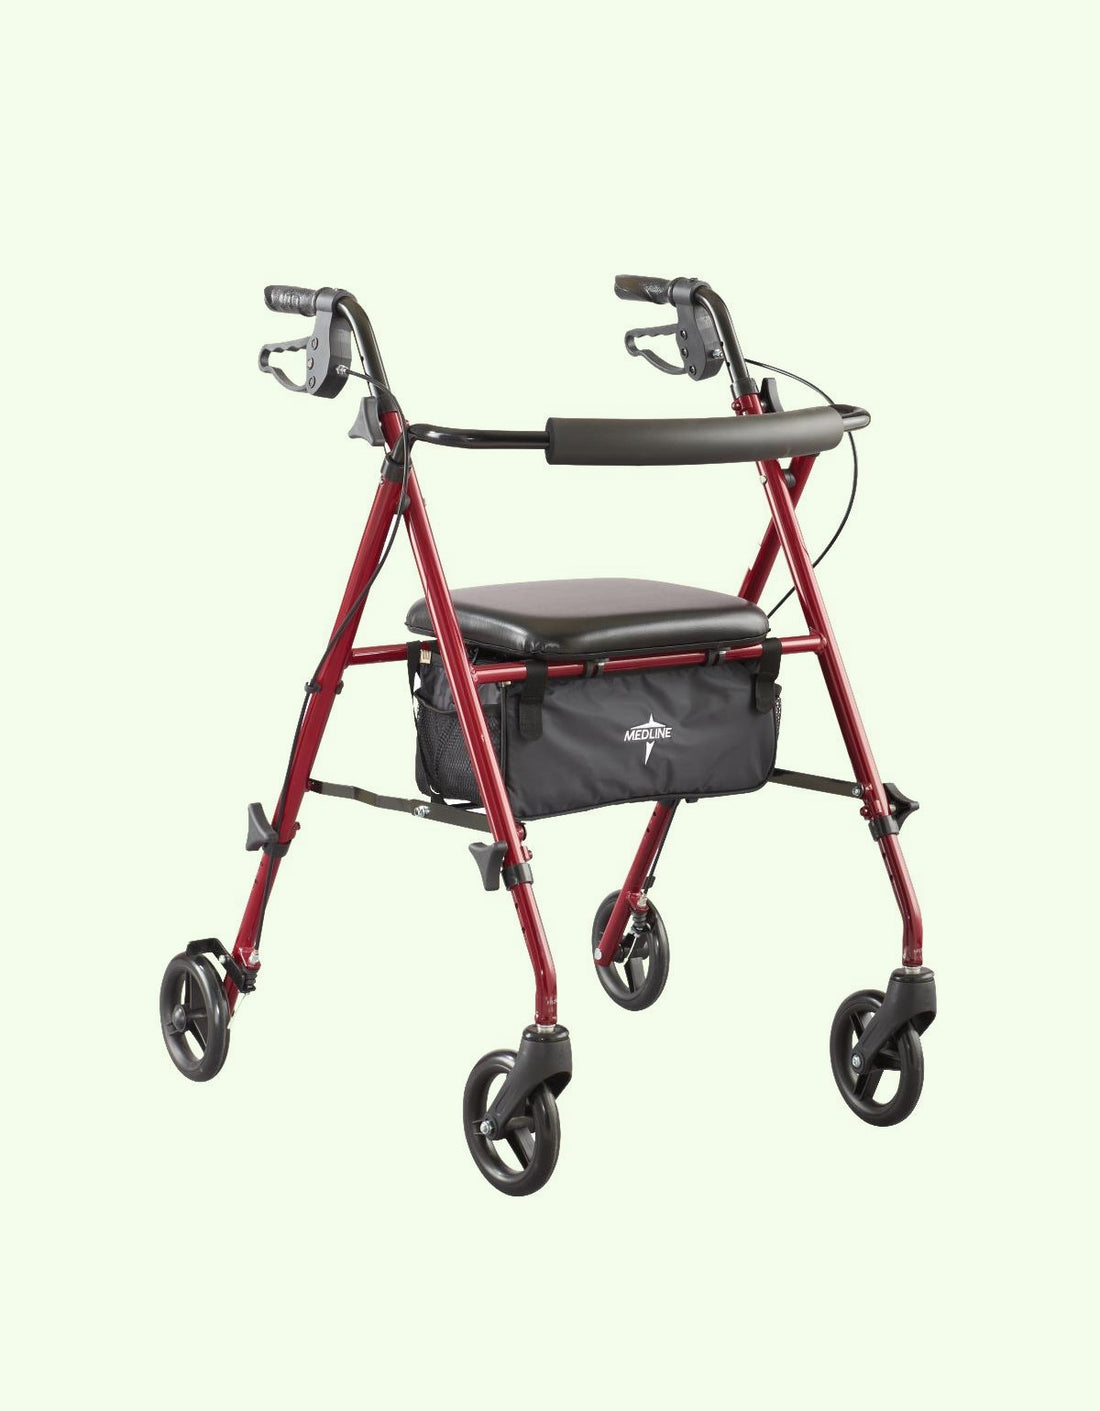 How to adjust the brakes on your Medline rollator